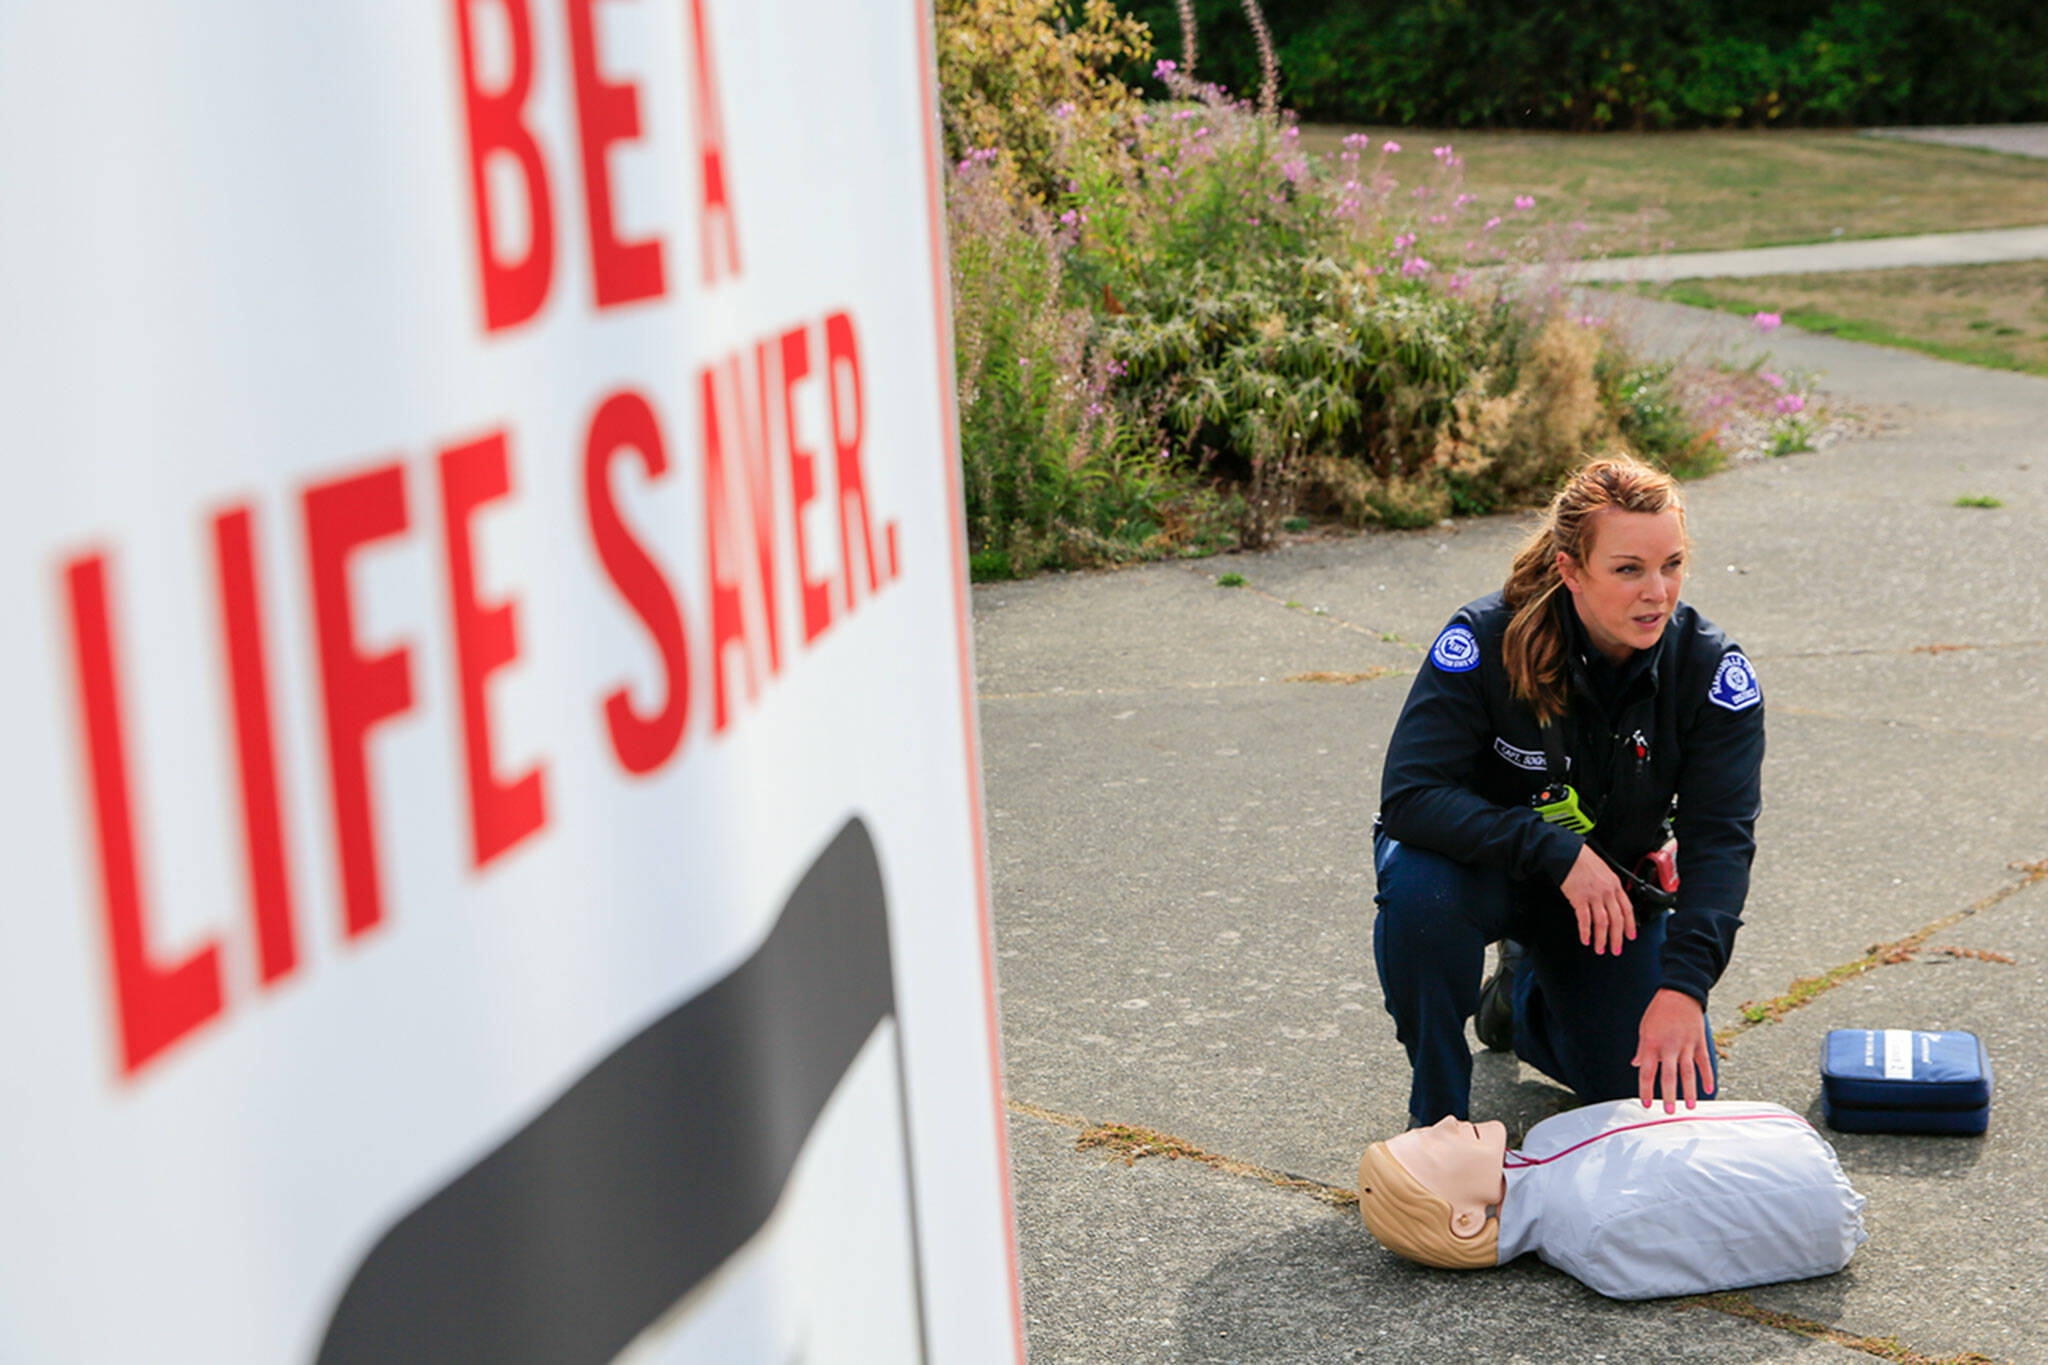 Capt. Kate Songhurst demonstrates proper CPR during the launch press briefing for the PulsePoint app Tuesday at Kasch Park in Everett. (Kevin Clark / The Herald)